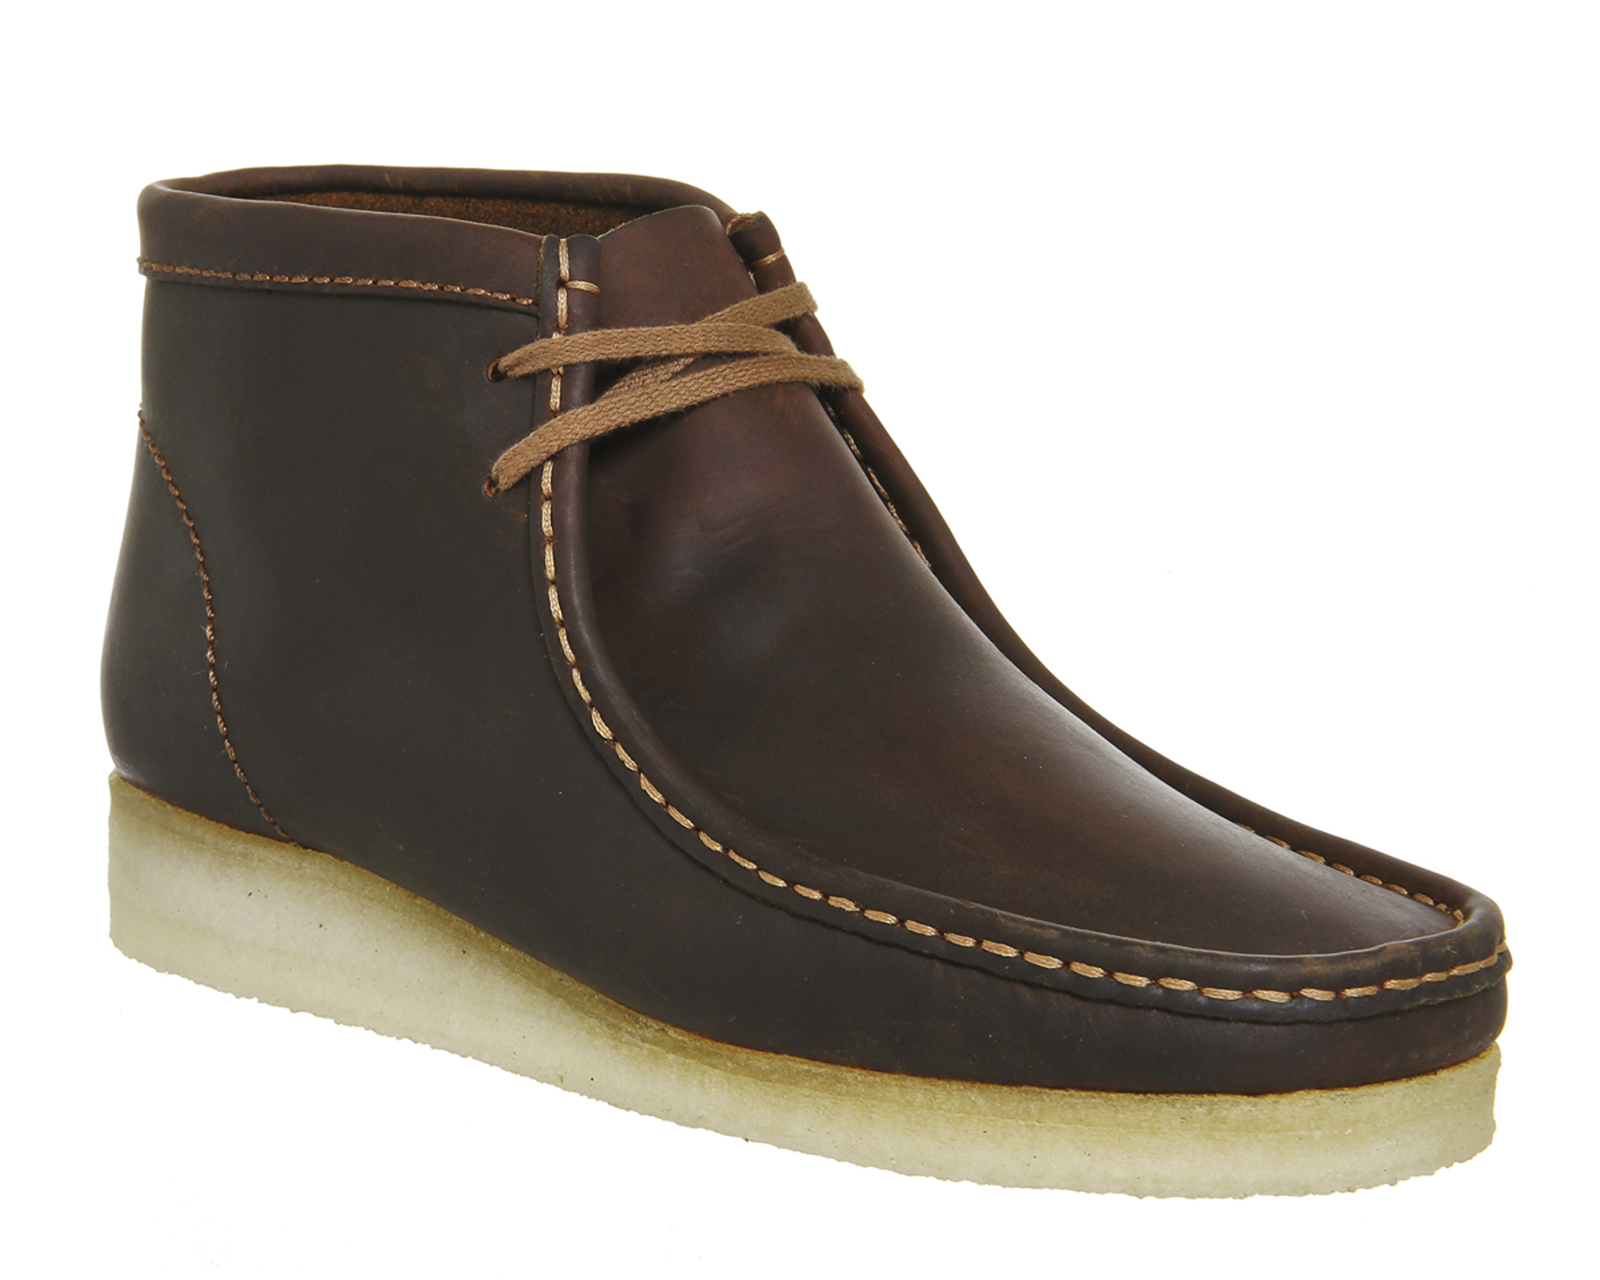 Clarks OriginalsWallabee BootBeeswax Leather